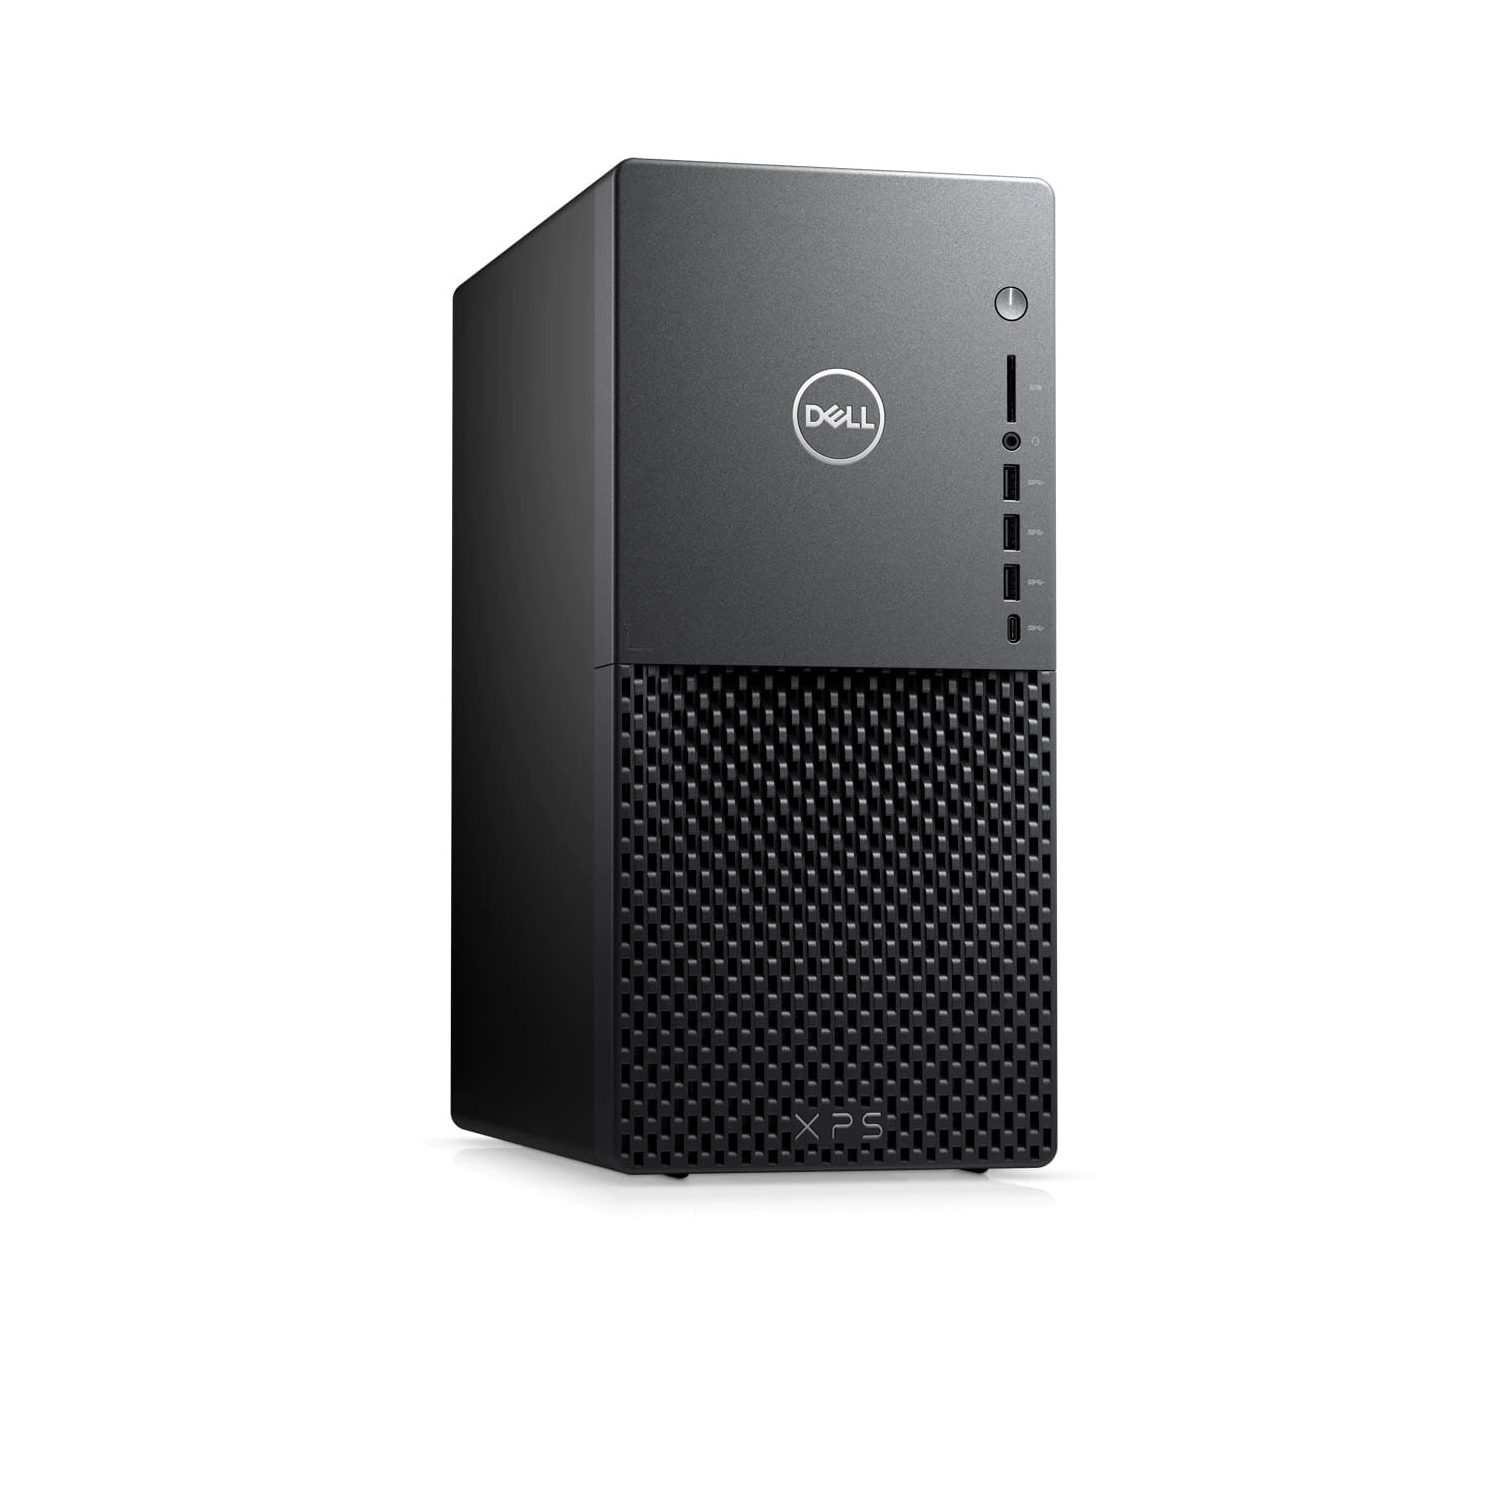 Refurbished (Excellent) - Dell XPS 8940 Desktop (2020) | Core i7 - 1TB HDD + 512GB SSD - 32GB RAM - 1660 Ti | 8 Cores @ 4.9 GHz - 11th Gen CPU Certified Refurbished